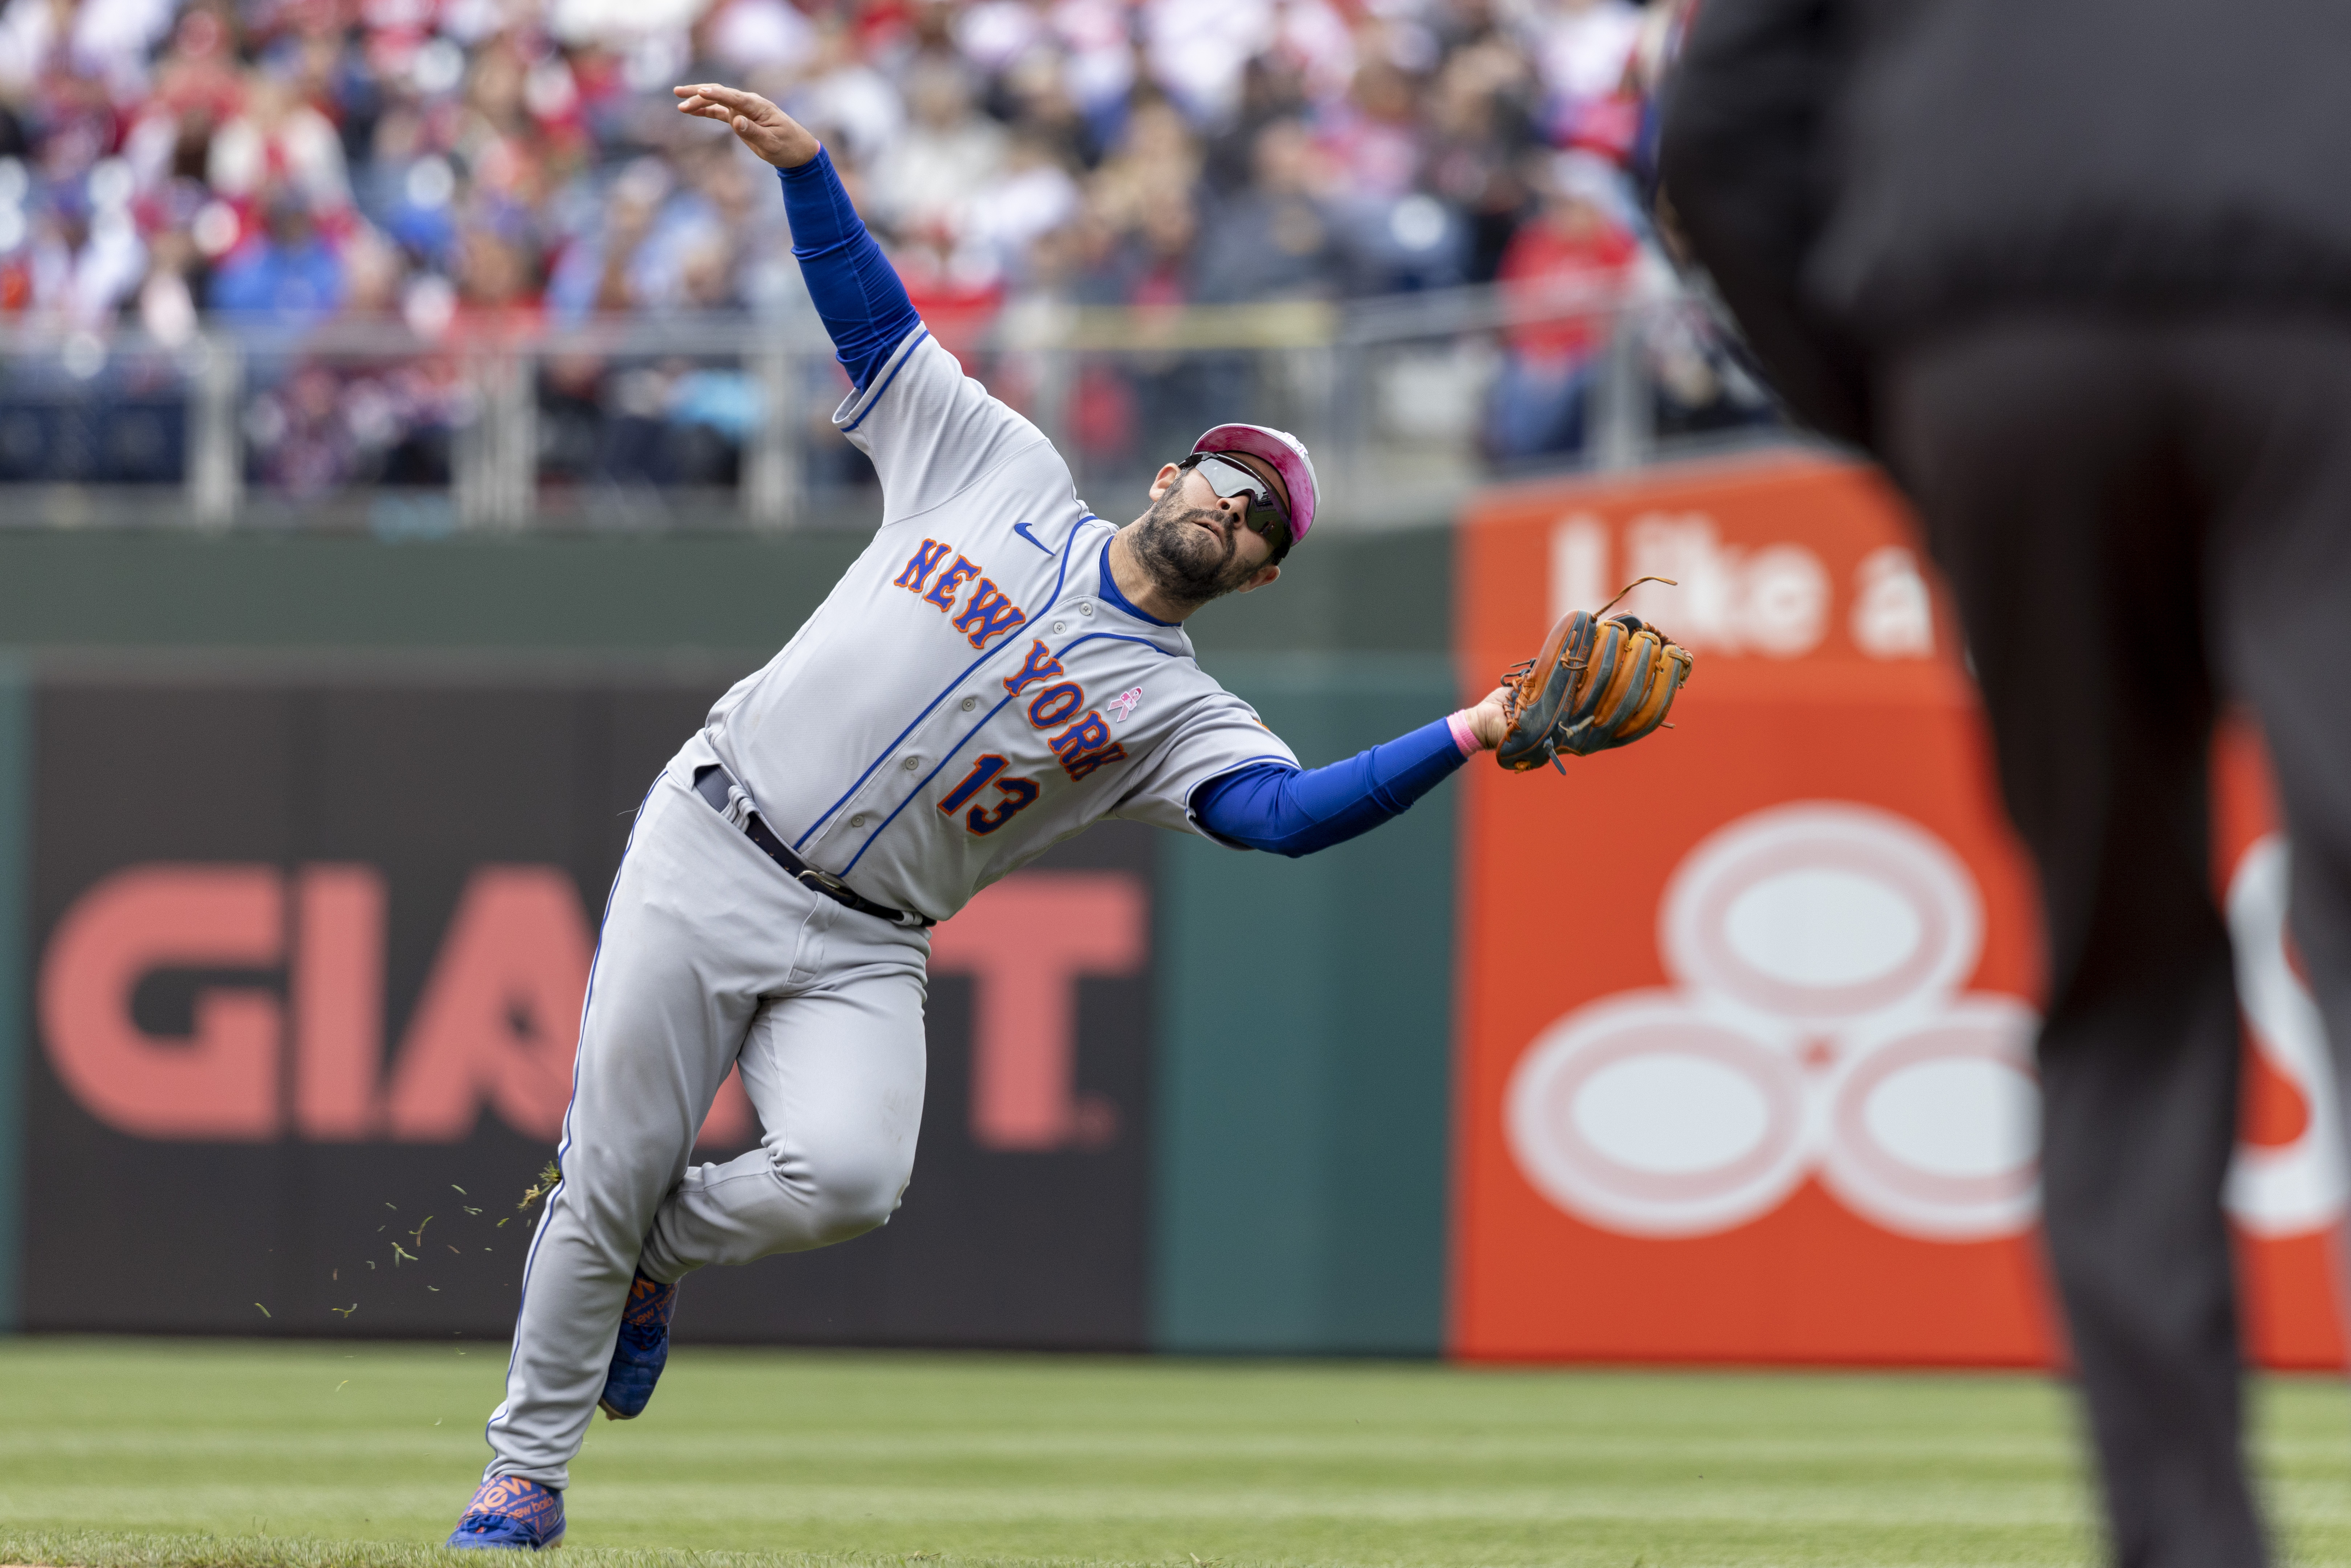 Pete Alonso homers twice to help the Mets beat the Nationals 5-1 - ABC News